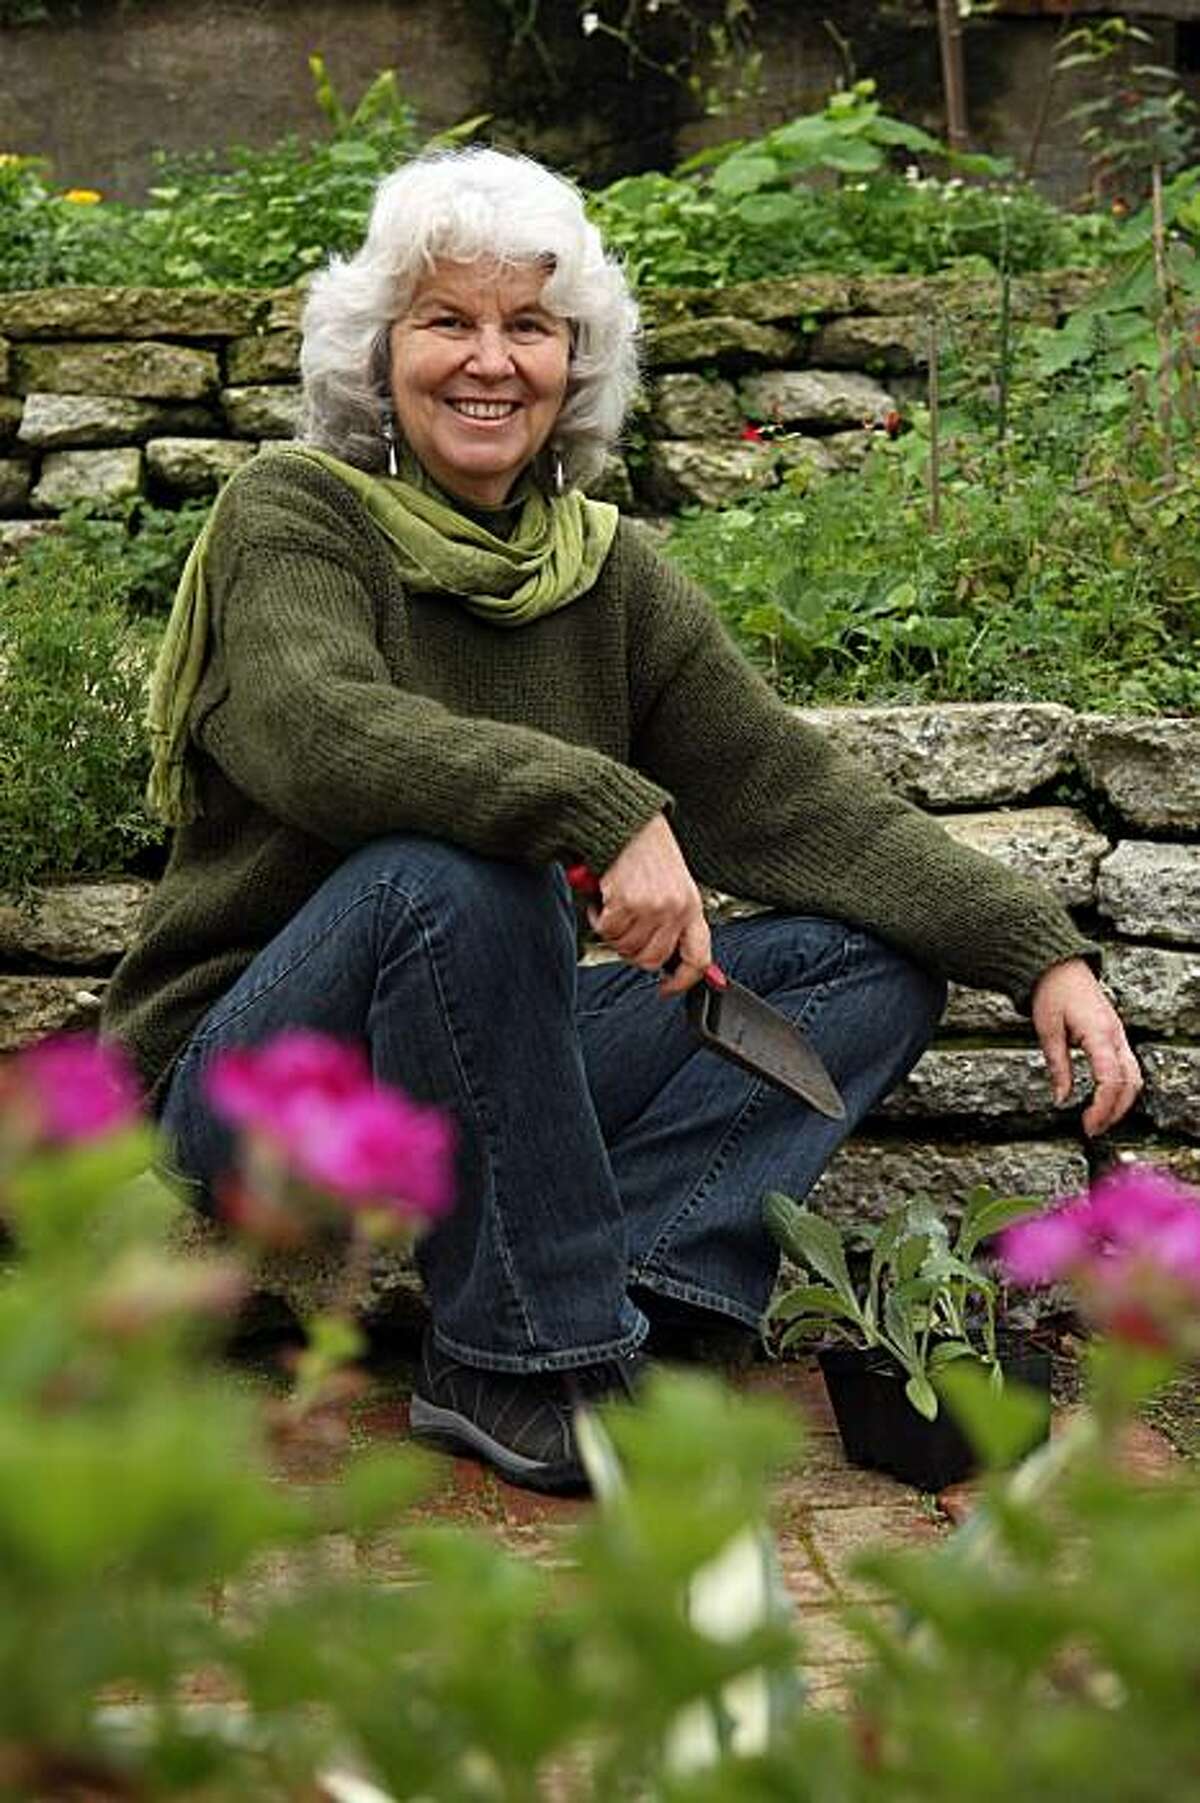 Pam Pierce, horticulturist and author of Golden Gate Gardening: The Complete Guide to Year-Round Food Gardening in the San Francisco Bay Area and Coastal California, sits in her back yard garden Friday, January 15, 2010.